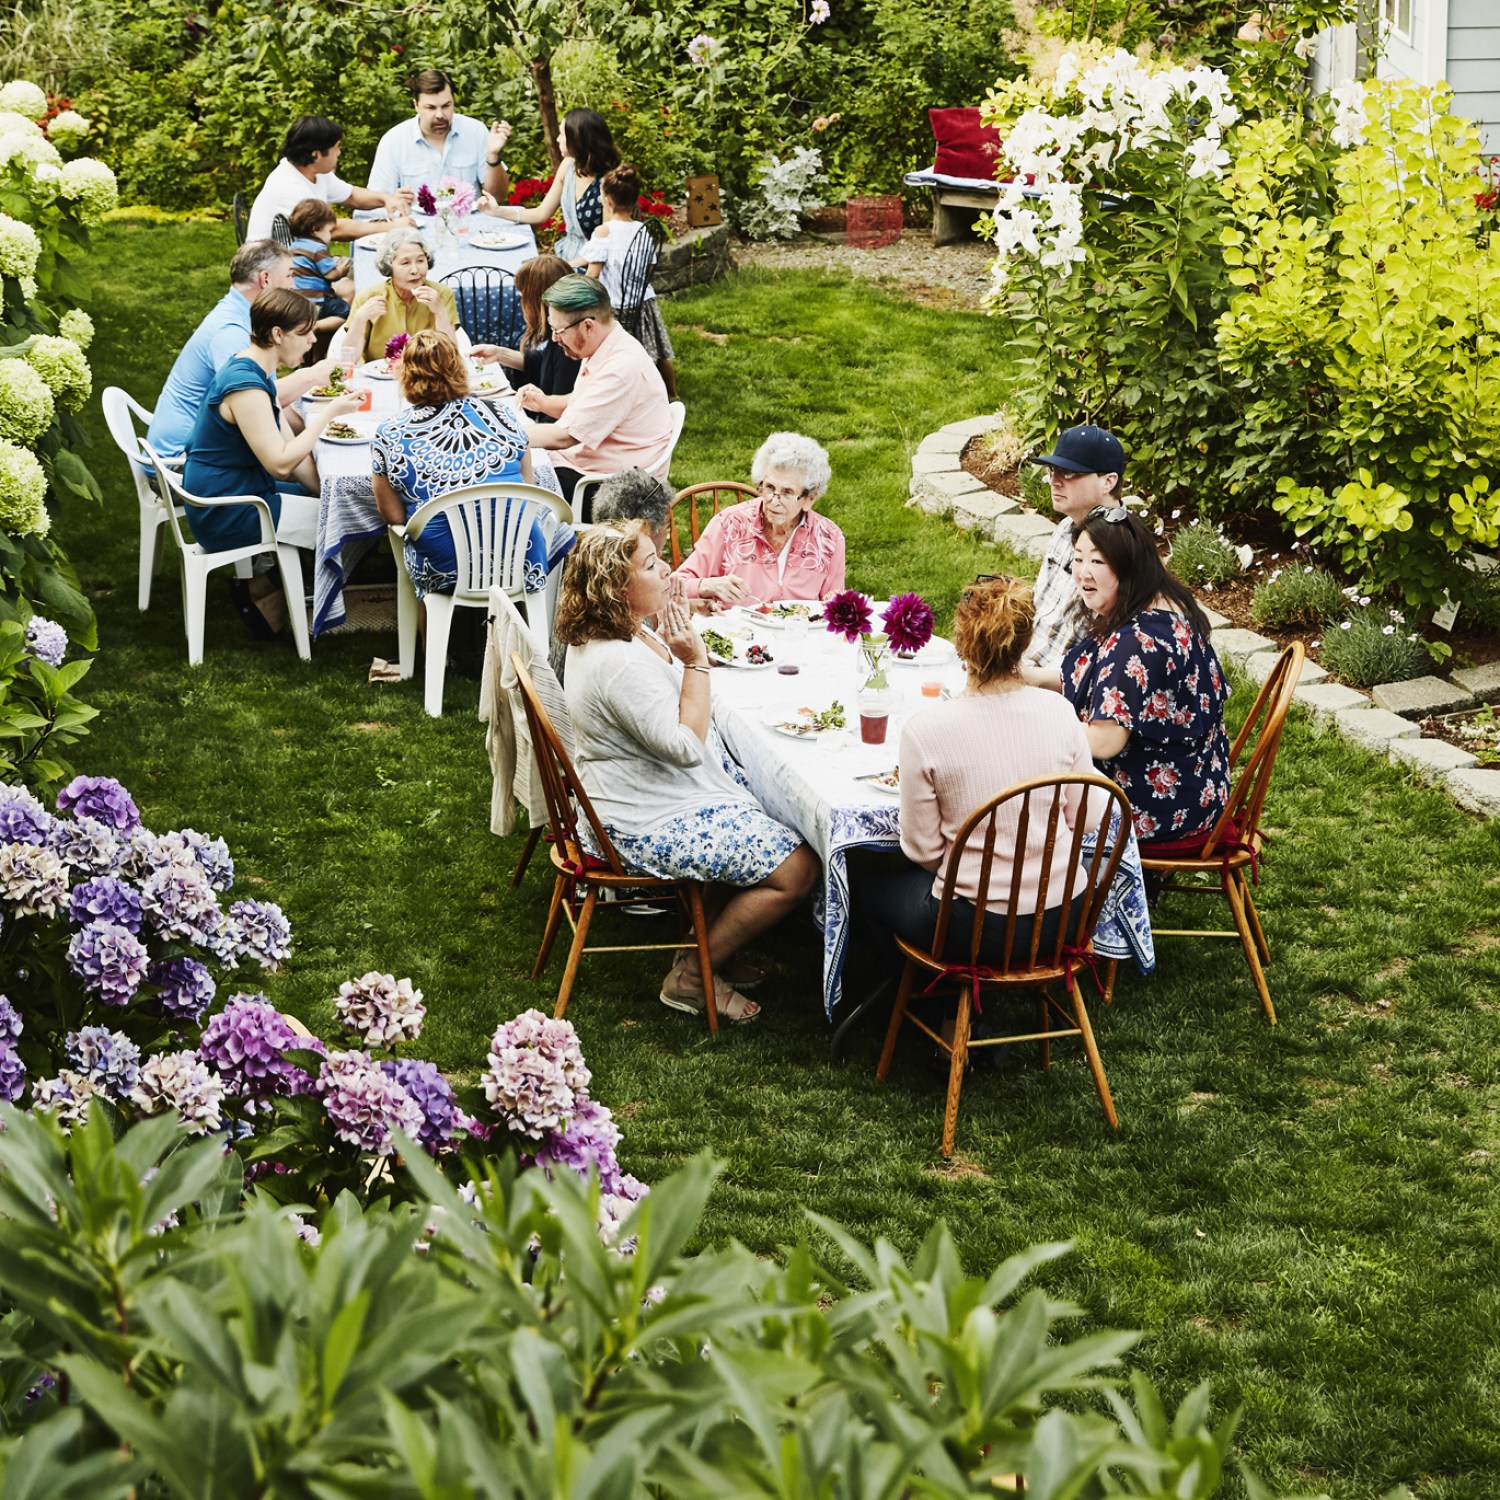 Families gathered at two tables enjoying time in backyard